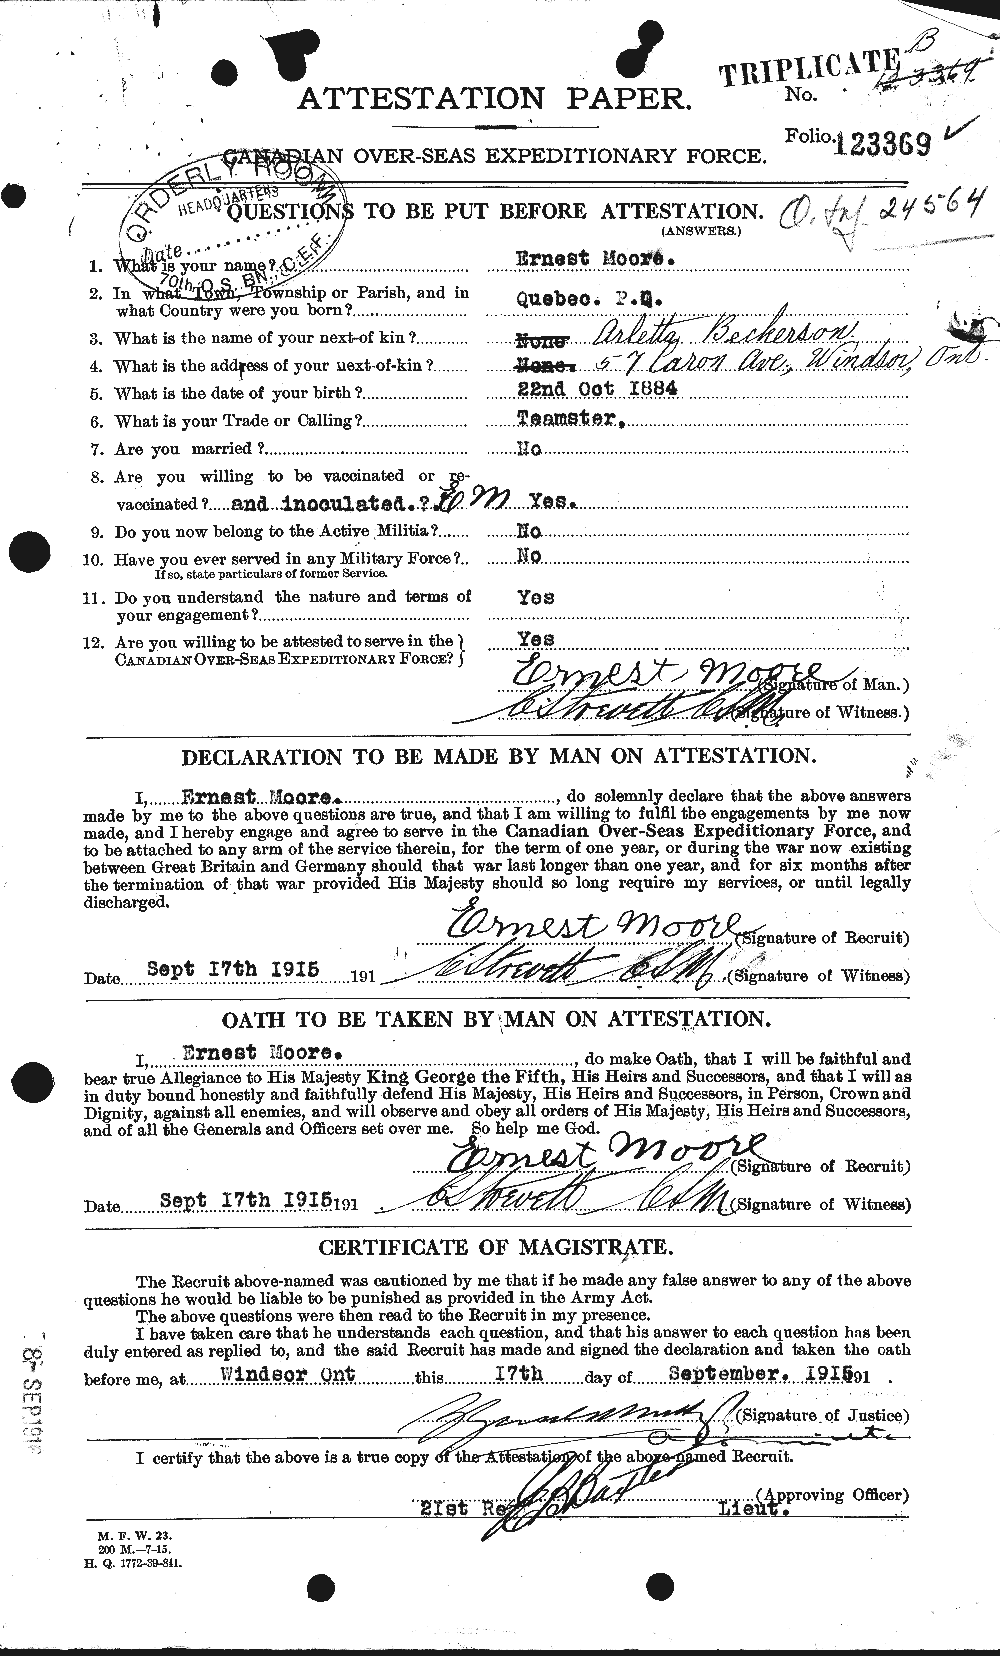 Personnel Records of the First World War - CEF 506659a